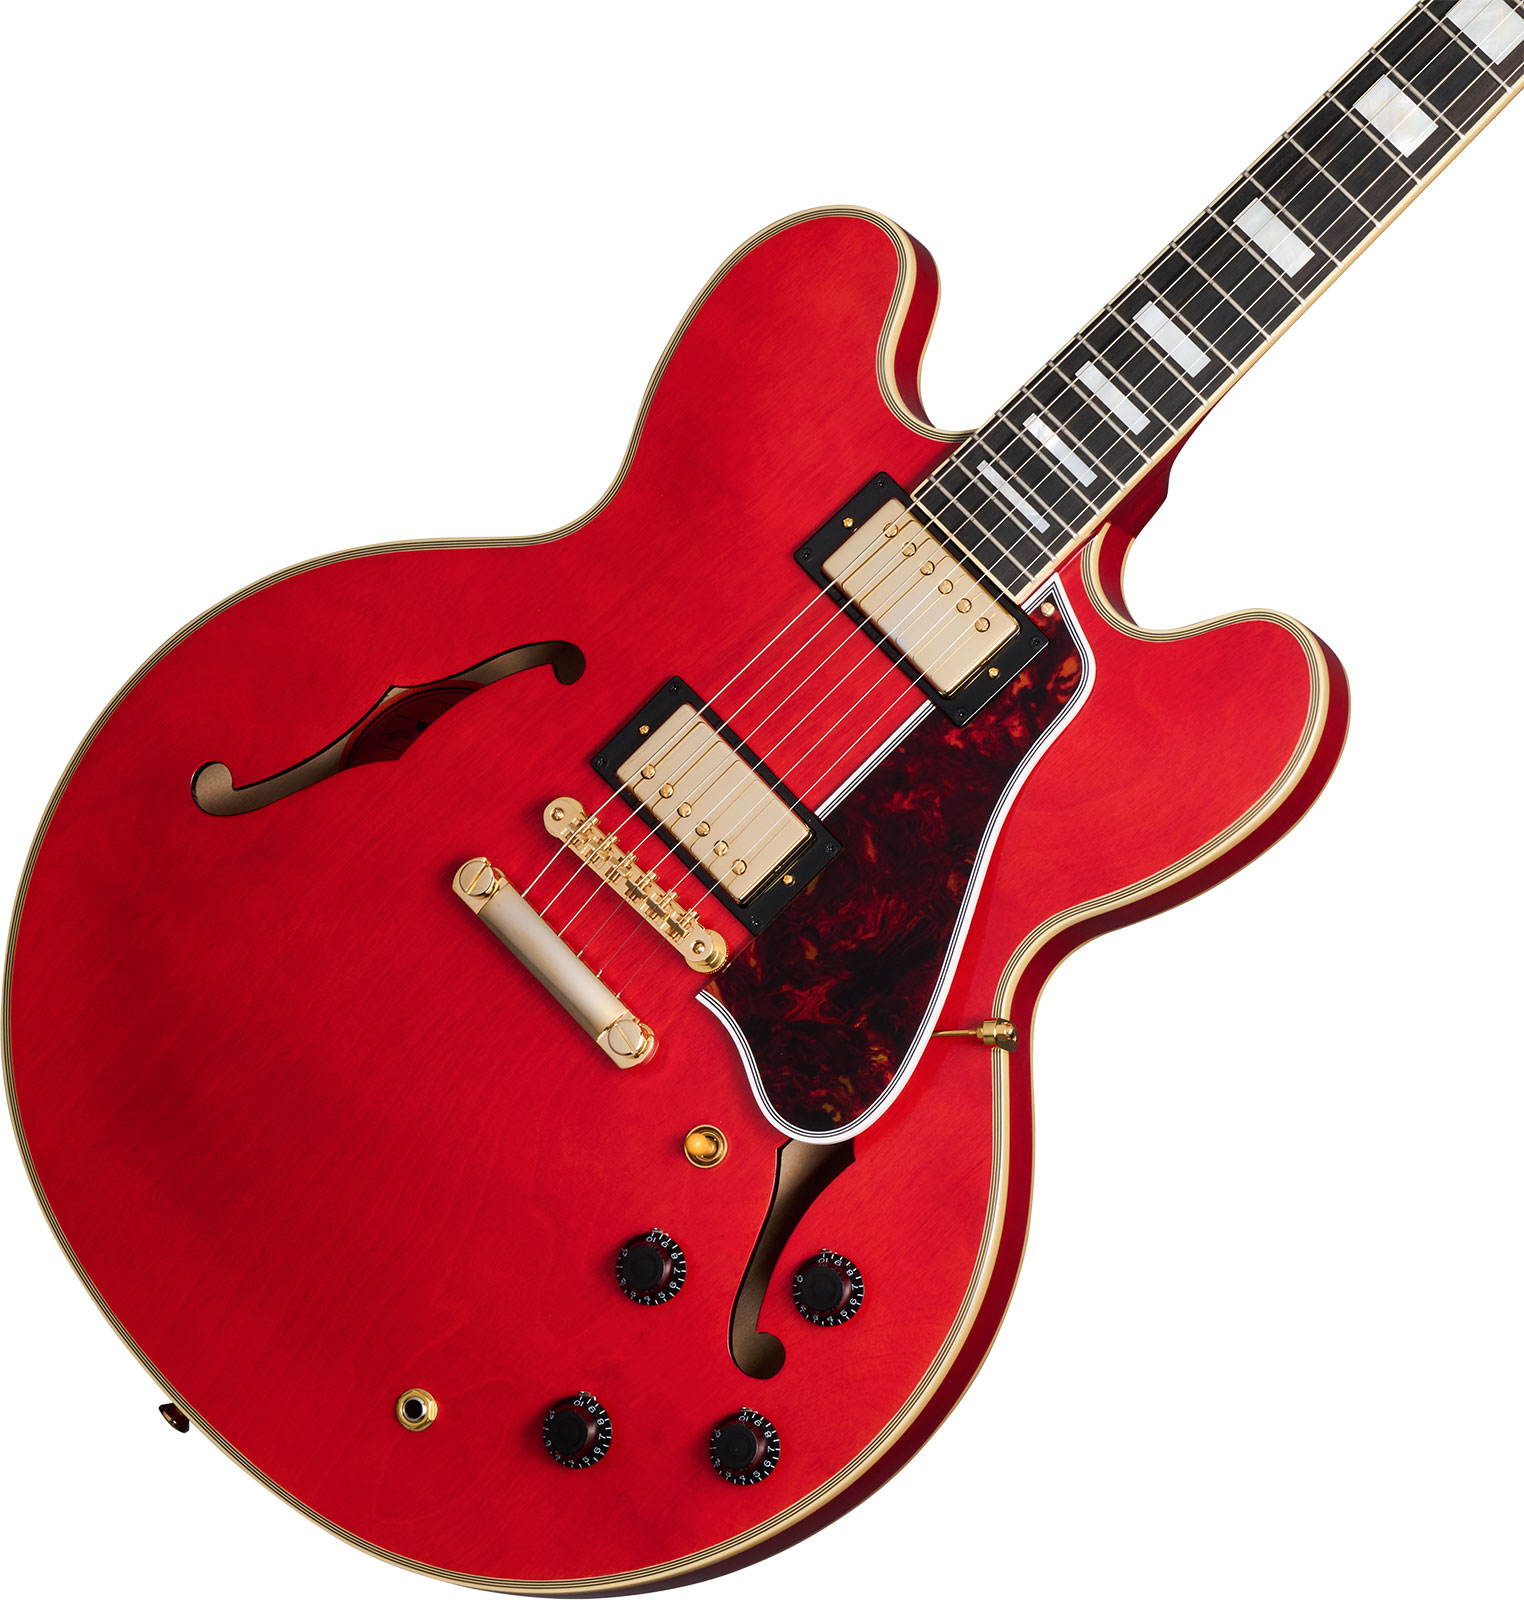 Epiphone Es355 1959 Inspired By 2h Gibson Ht Eb - Vos Cherry Red - Semi-Hollow E-Gitarre - Variation 3